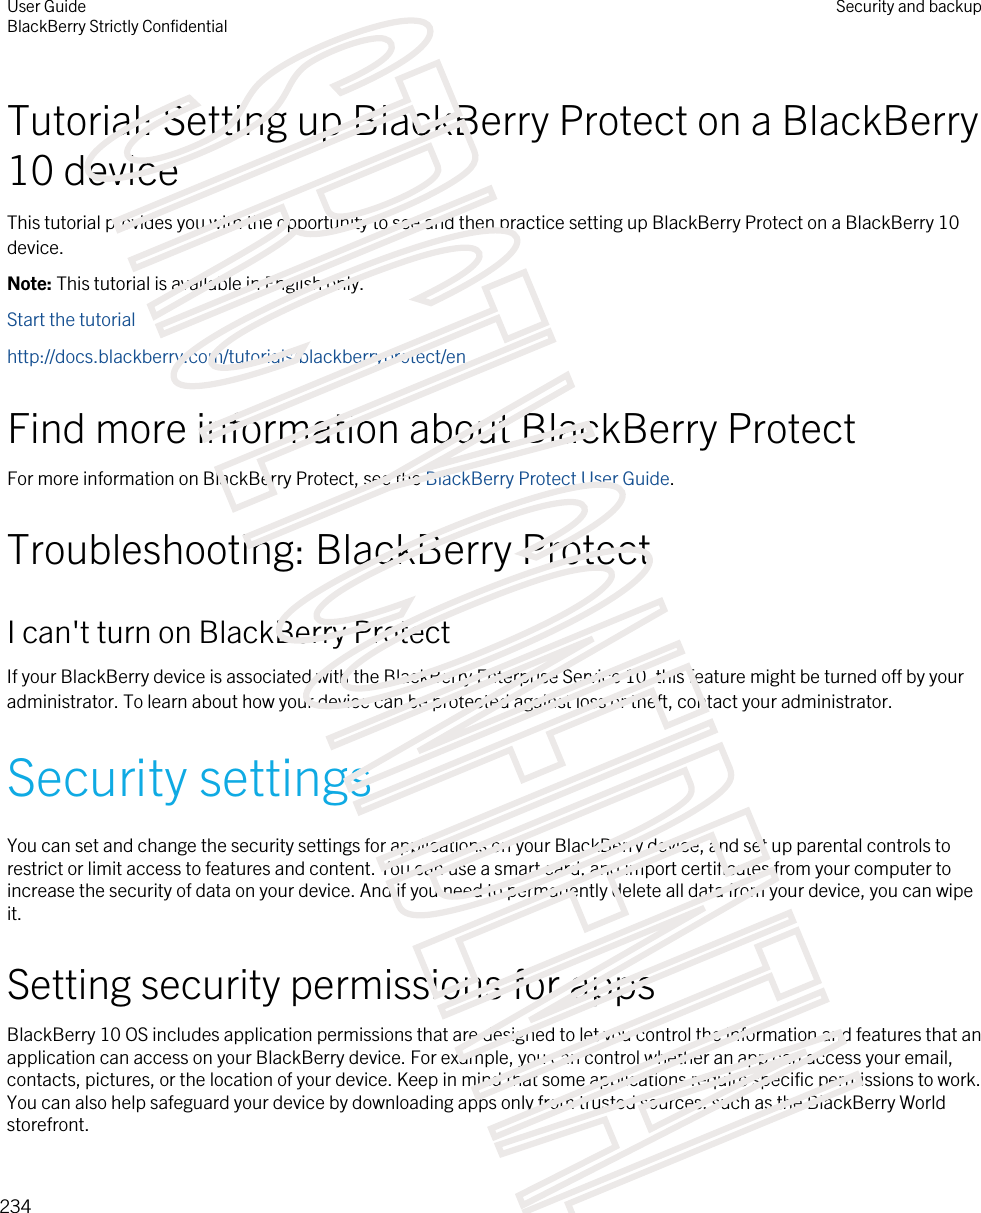 Tutorial: Setting up BlackBerry Protect on a BlackBerry 10 deviceThis tutorial provides you with the opportunity to see and then practice setting up BlackBerry Protect on a BlackBerry 10 device.Note: This tutorial is available in English only.Start the tutorialhttp://docs.blackberry.com/tutorials/blackberryprotect/enFind more information about BlackBerry ProtectFor more information on BlackBerry Protect, see the BlackBerry Protect User Guide.Troubleshooting: BlackBerry ProtectI can&apos;t turn on BlackBerry ProtectIf your BlackBerry device is associated with the BlackBerry Enterprise Service 10, this feature might be turned off by your administrator. To learn about how your device can be protected against loss or theft, contact your administrator.Security settingsYou can set and change the security settings for applications on your BlackBerry device, and set up parental controls to restrict or limit access to features and content. You can use a smart card, and import certificates from your computer to increase the security of data on your device. And if you need to permanently delete all data from your device, you can wipe it.Setting security permissions for appsBlackBerry 10 OS includes application permissions that are designed to let you control the information and features that an application can access on your BlackBerry device. For example, you can control whether an app can access your email, contacts, pictures, or the location of your device. Keep in mind that some applications require specific permissions to work. You can also help safeguard your device by downloading apps only from trusted sources, such as the BlackBerry World storefront.User GuideBlackBerry Strictly ConfidentialSecurity and backup234STRICTLY CONFIDENTIAL